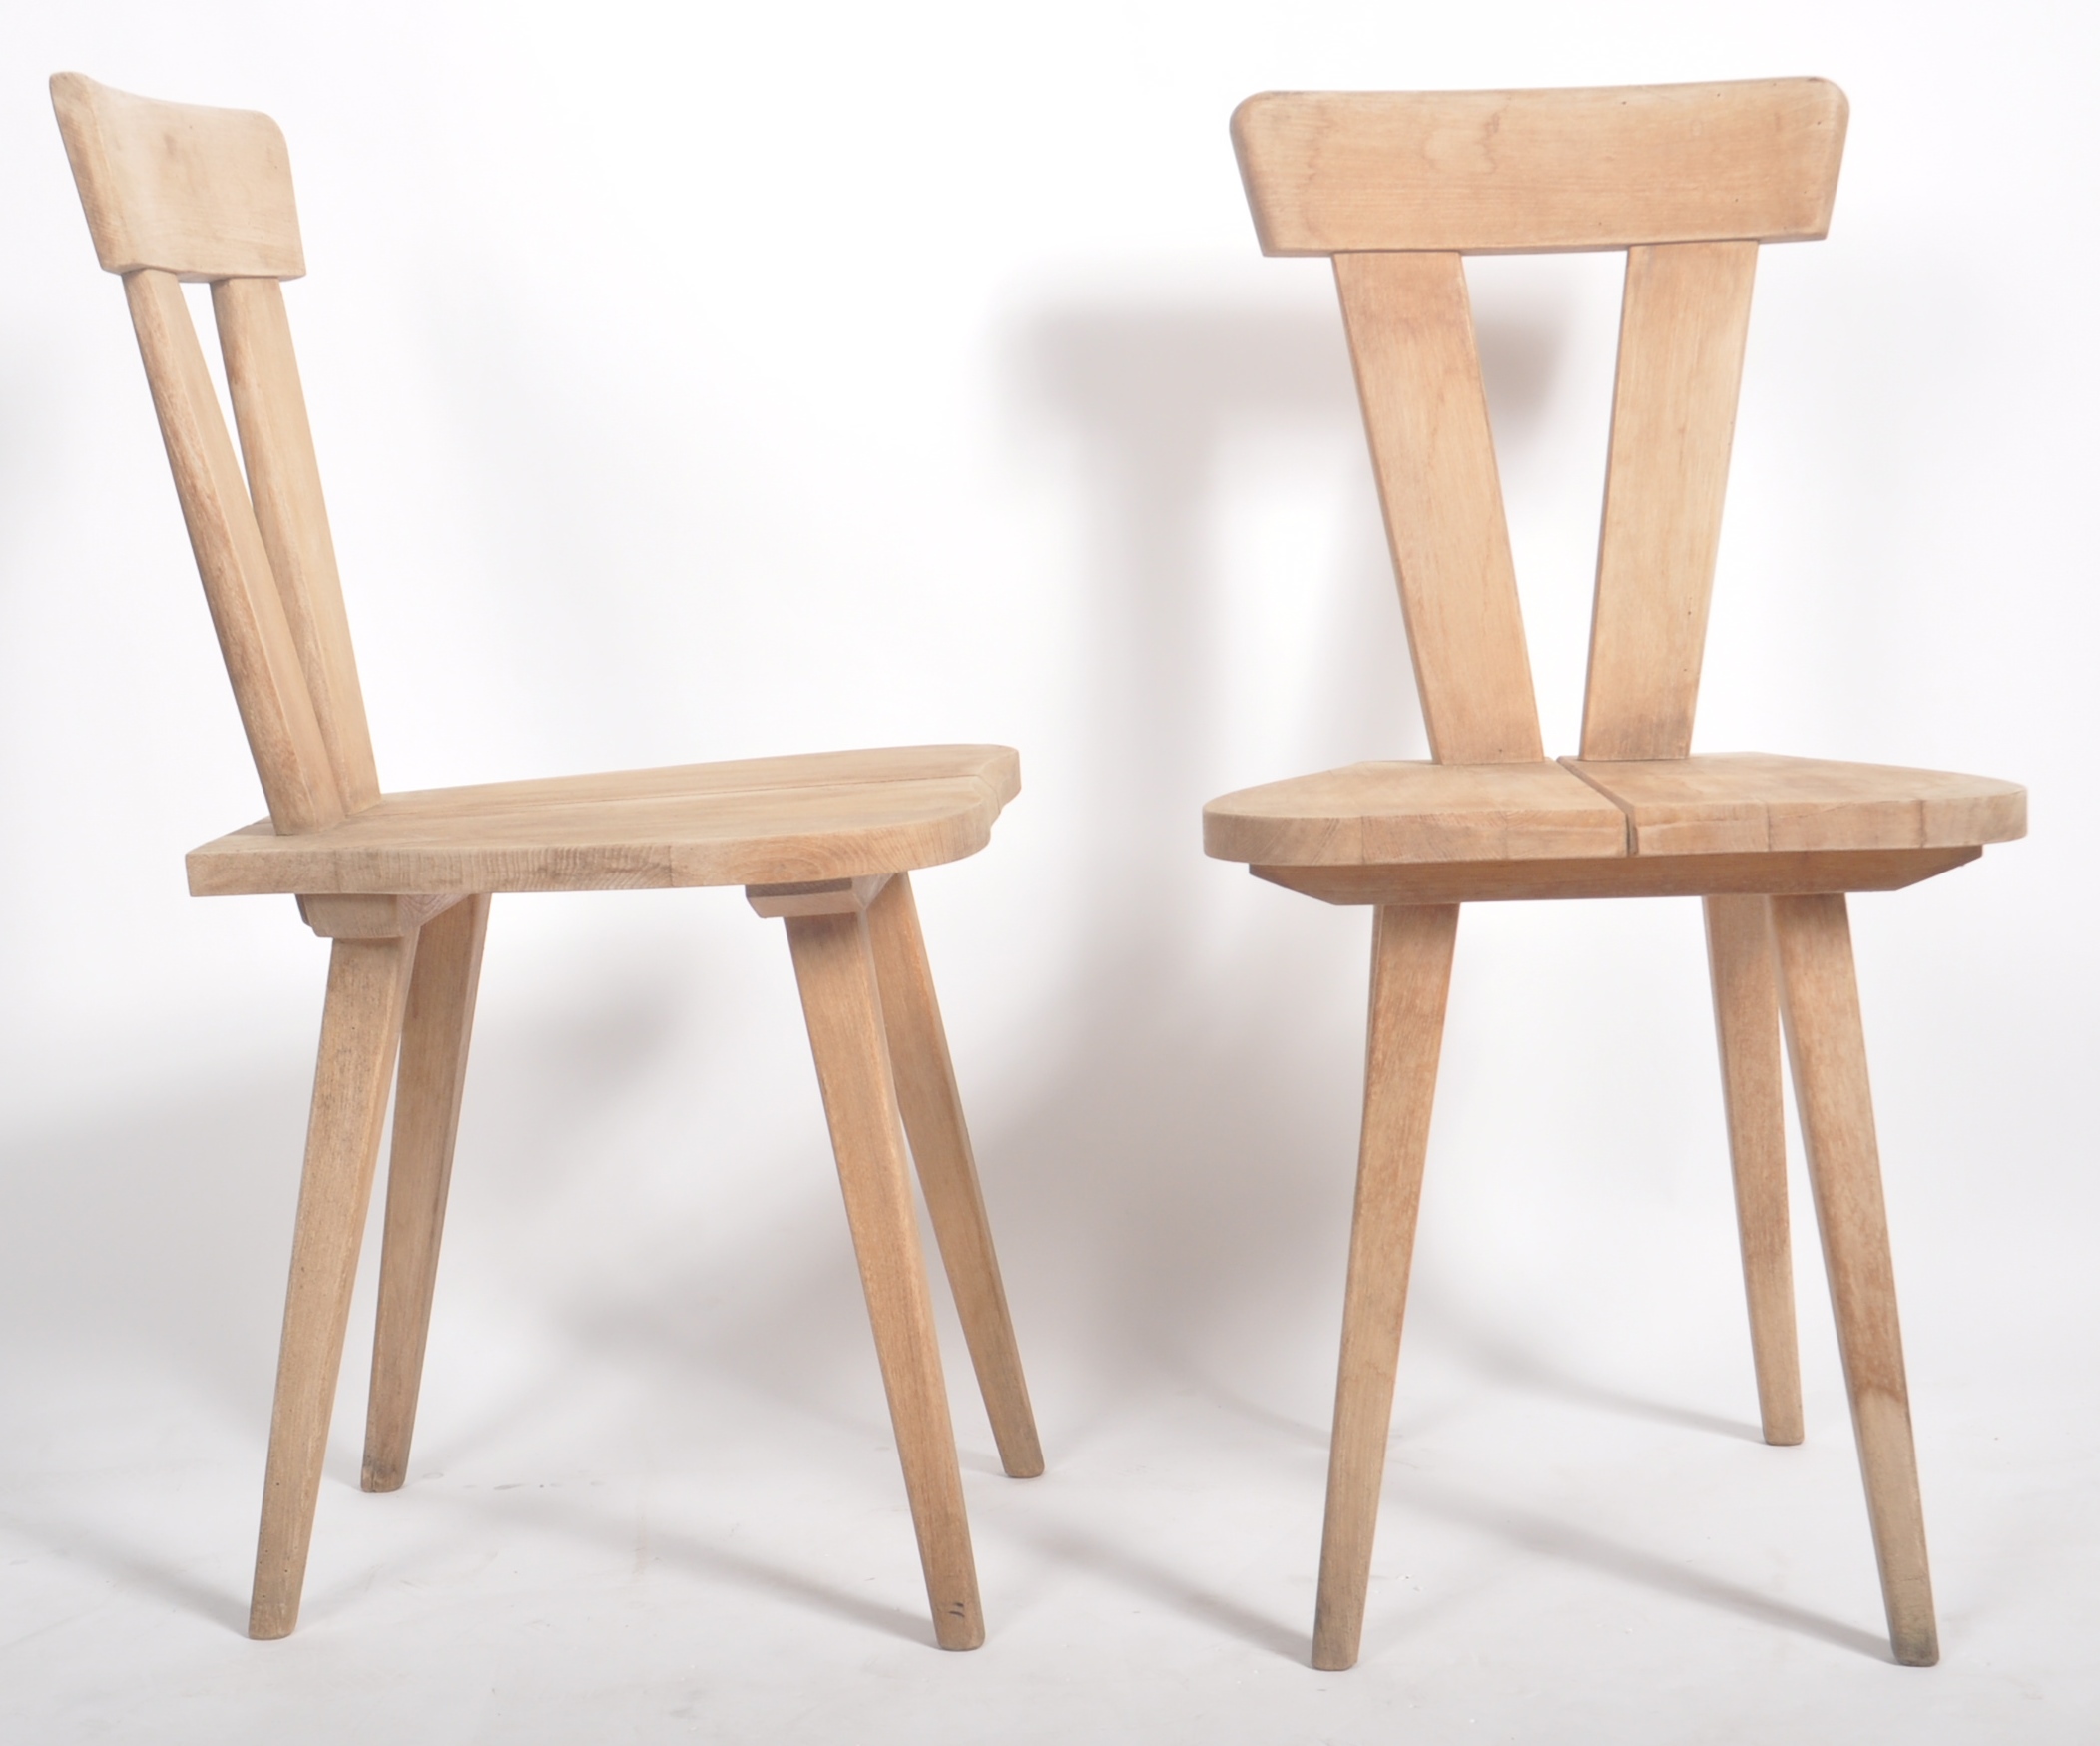 ZYDEL BY WINCZE & SZLEKYS - SET OF FOUR DINING CHAIRS - Image 5 of 7